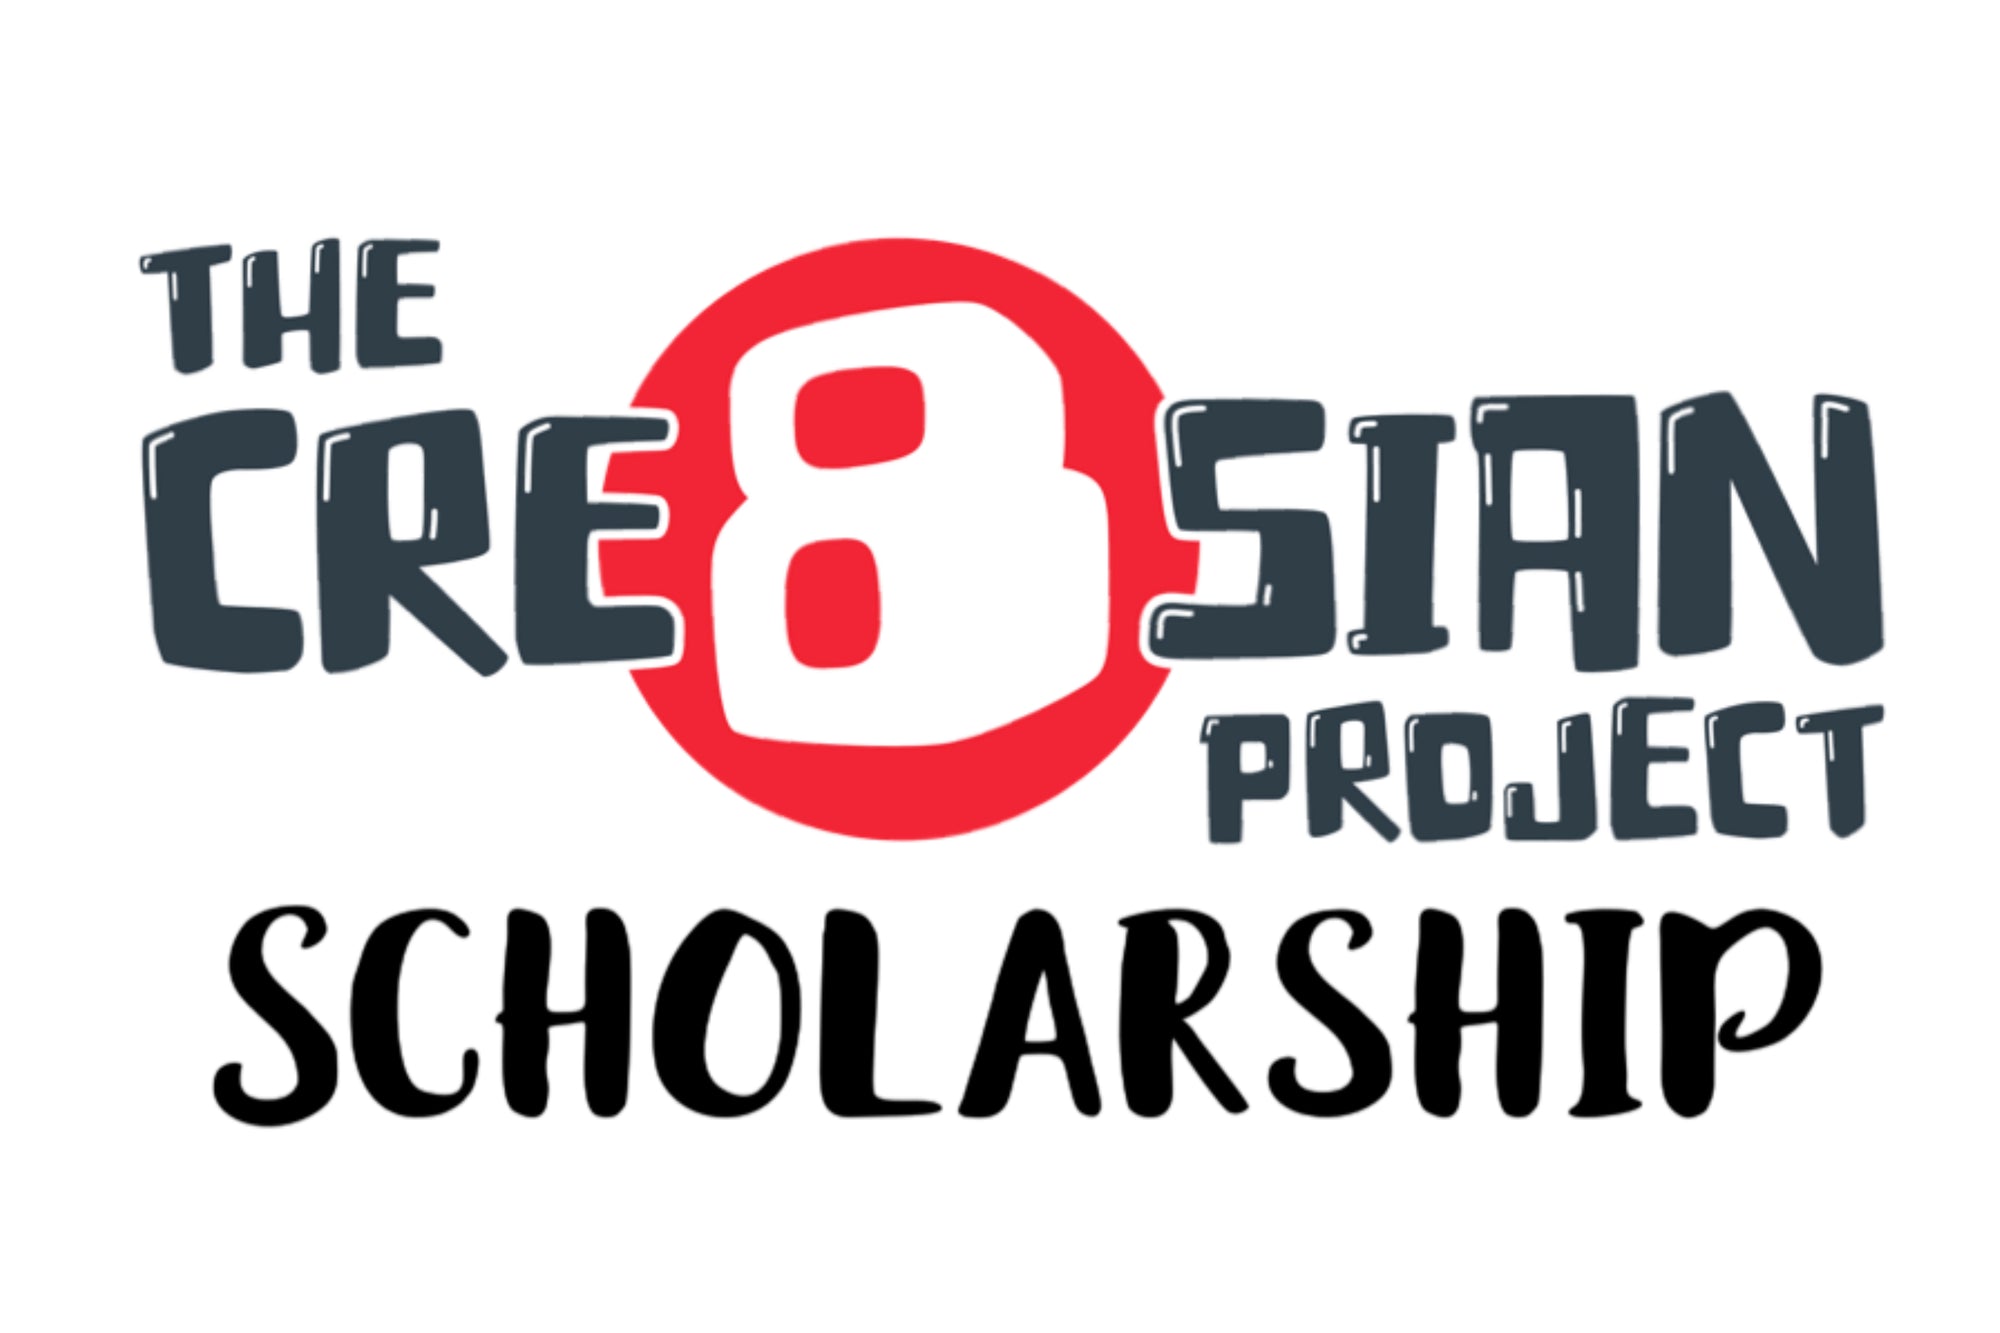 Announcing the winners of the 2023-2024 Cre8sian Project Scholarships!